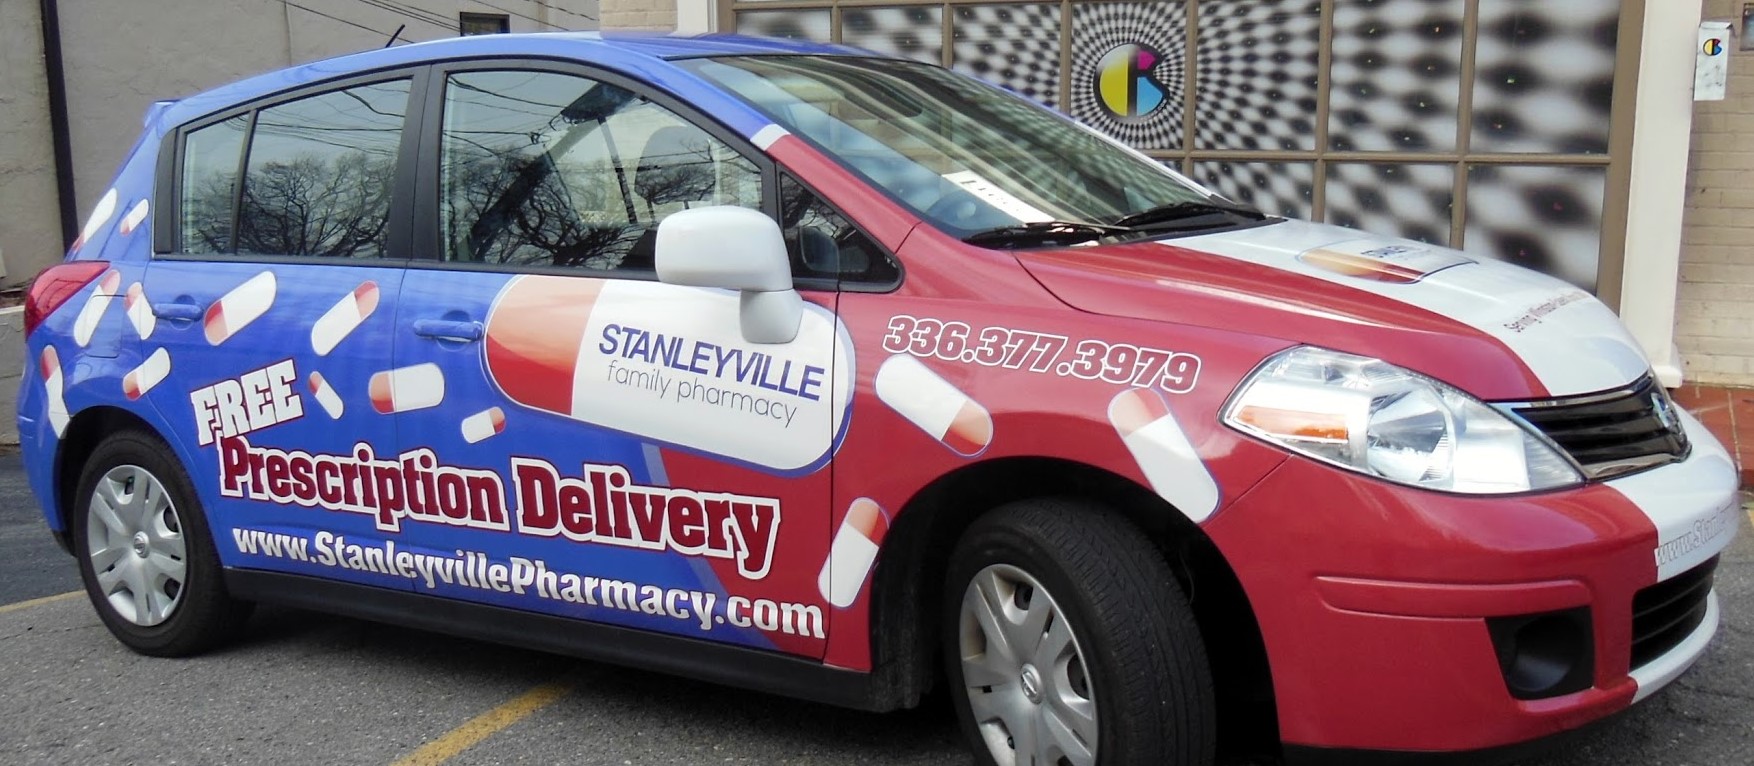 Stanleyville Family Pharmacy vehicle full wraps right angle view